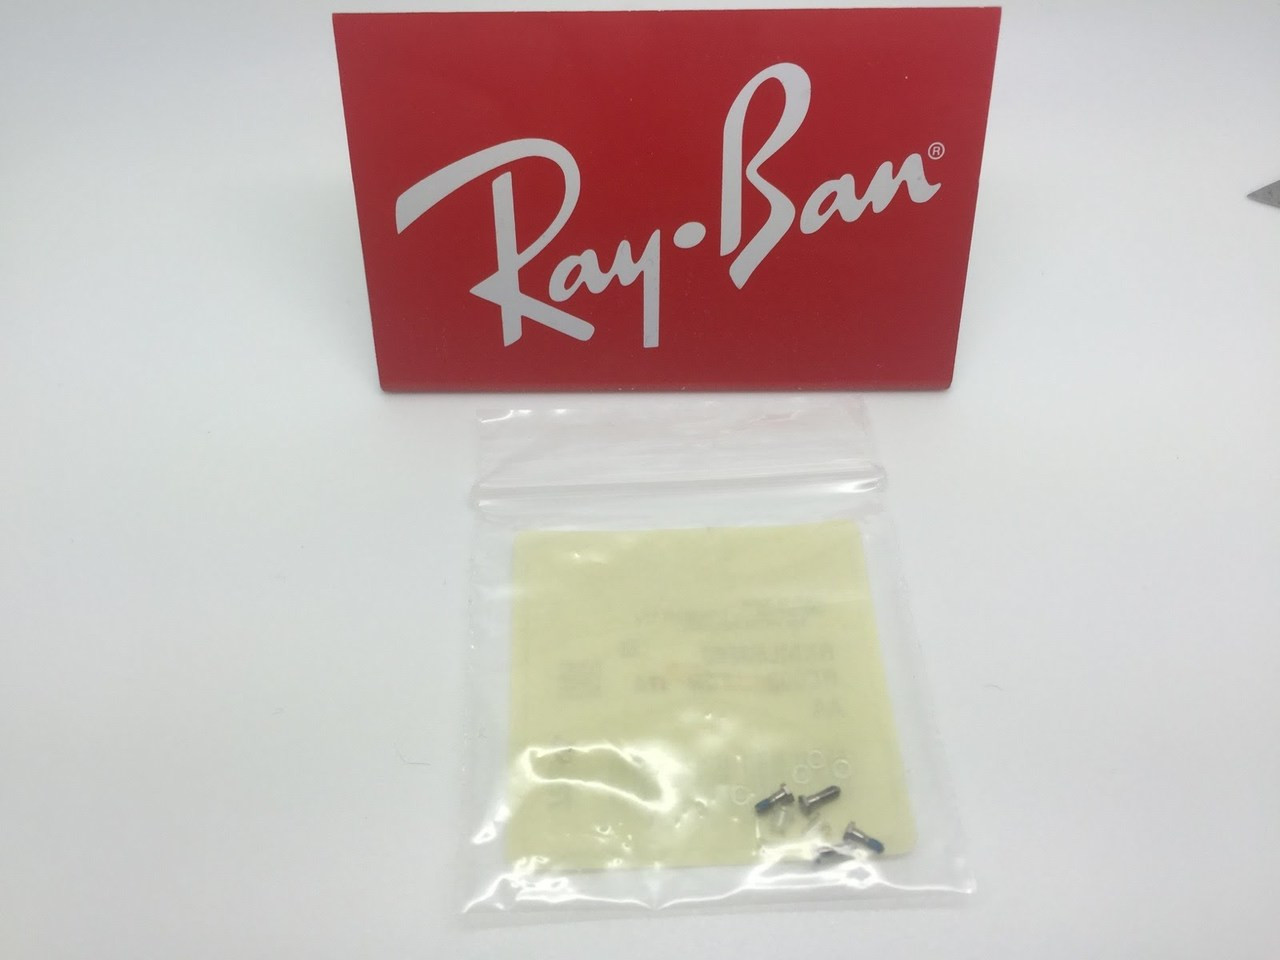 ray ban 3179 replacement lenses